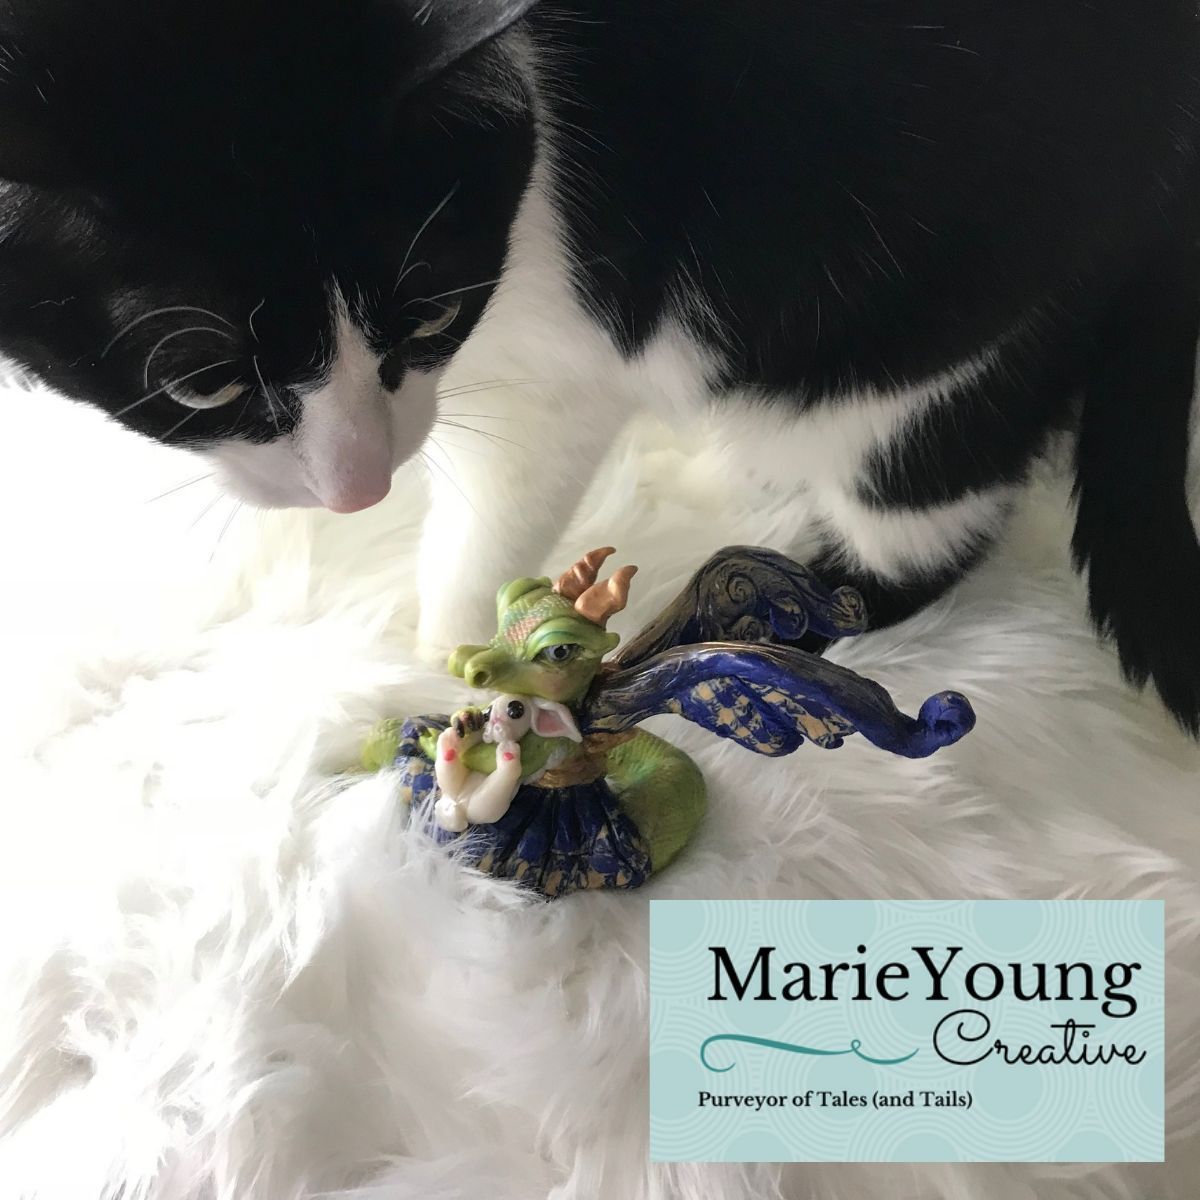 Black and white cat sniffing dragon sculpture